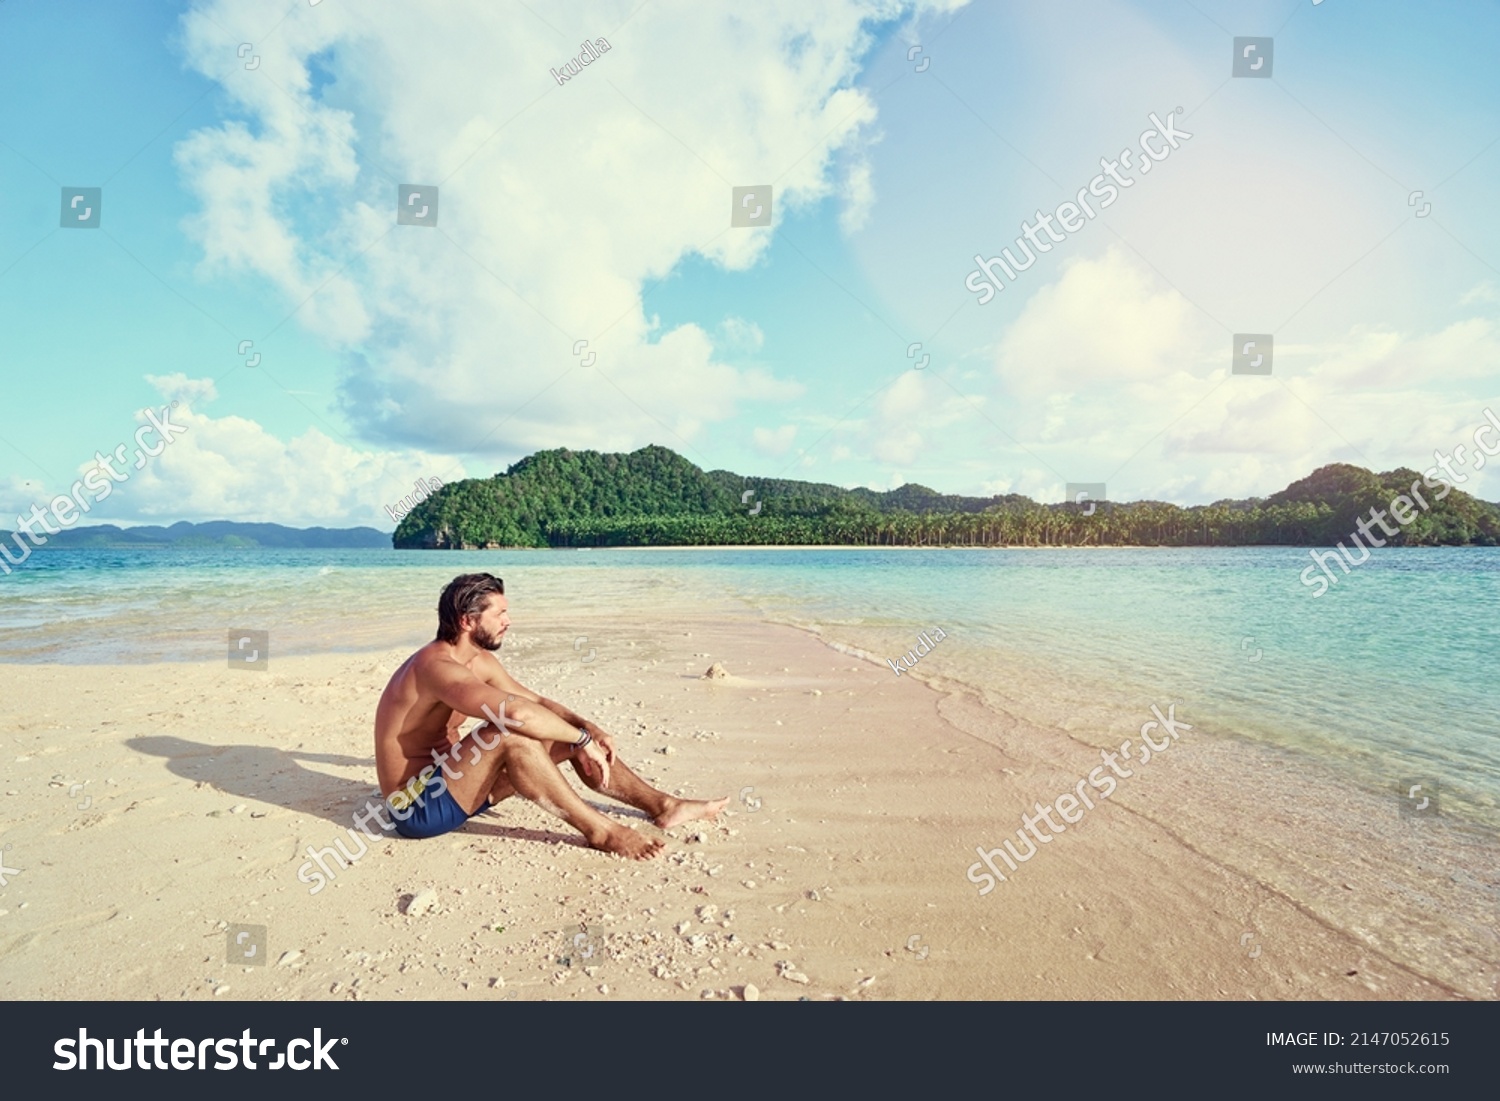 Tropical vacation. Relaxed young man sitting on the sand beach enjoying the island view. #2147052615